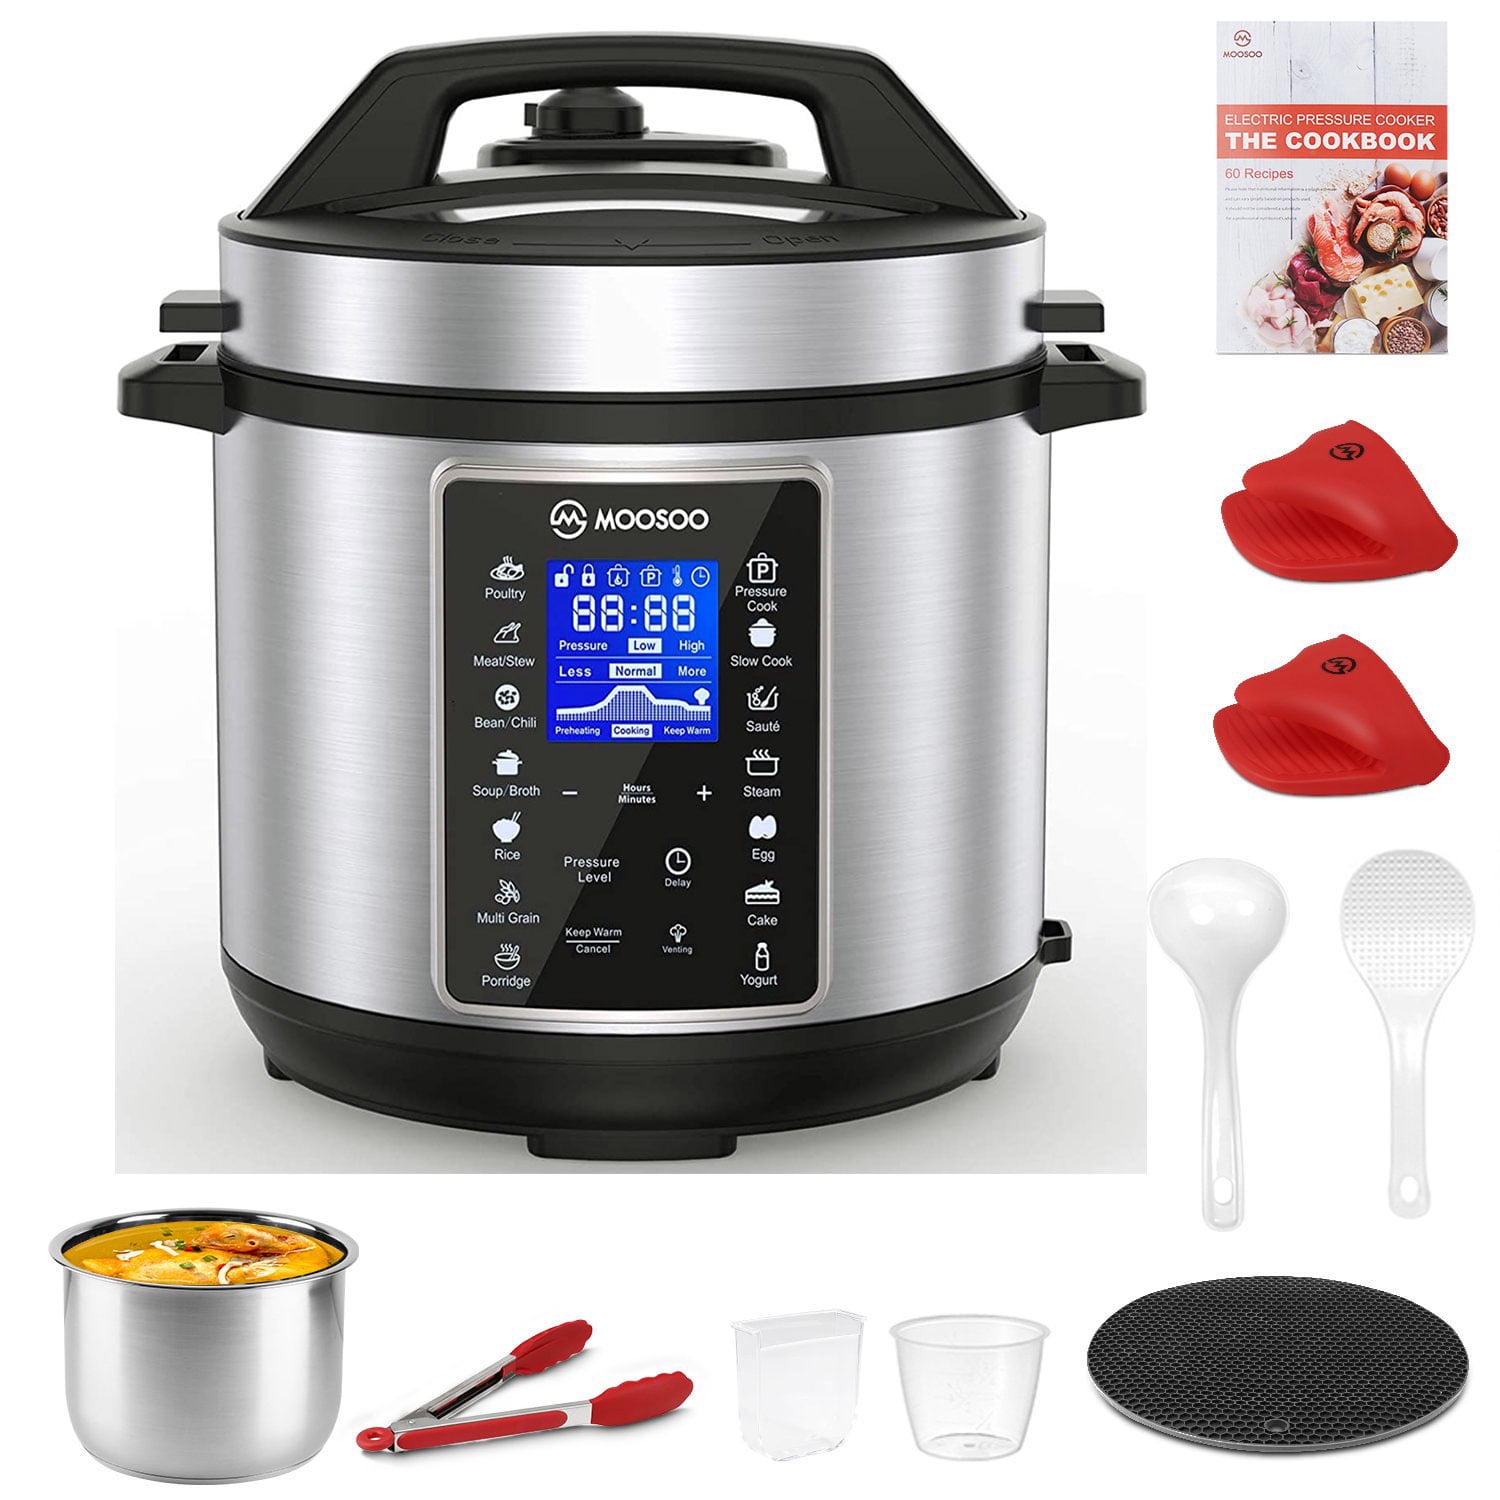 Details about   Mueller 6 Quart Pressure Cooker 10 in 1 Cook 2 Dishes at Once Slate Gray 